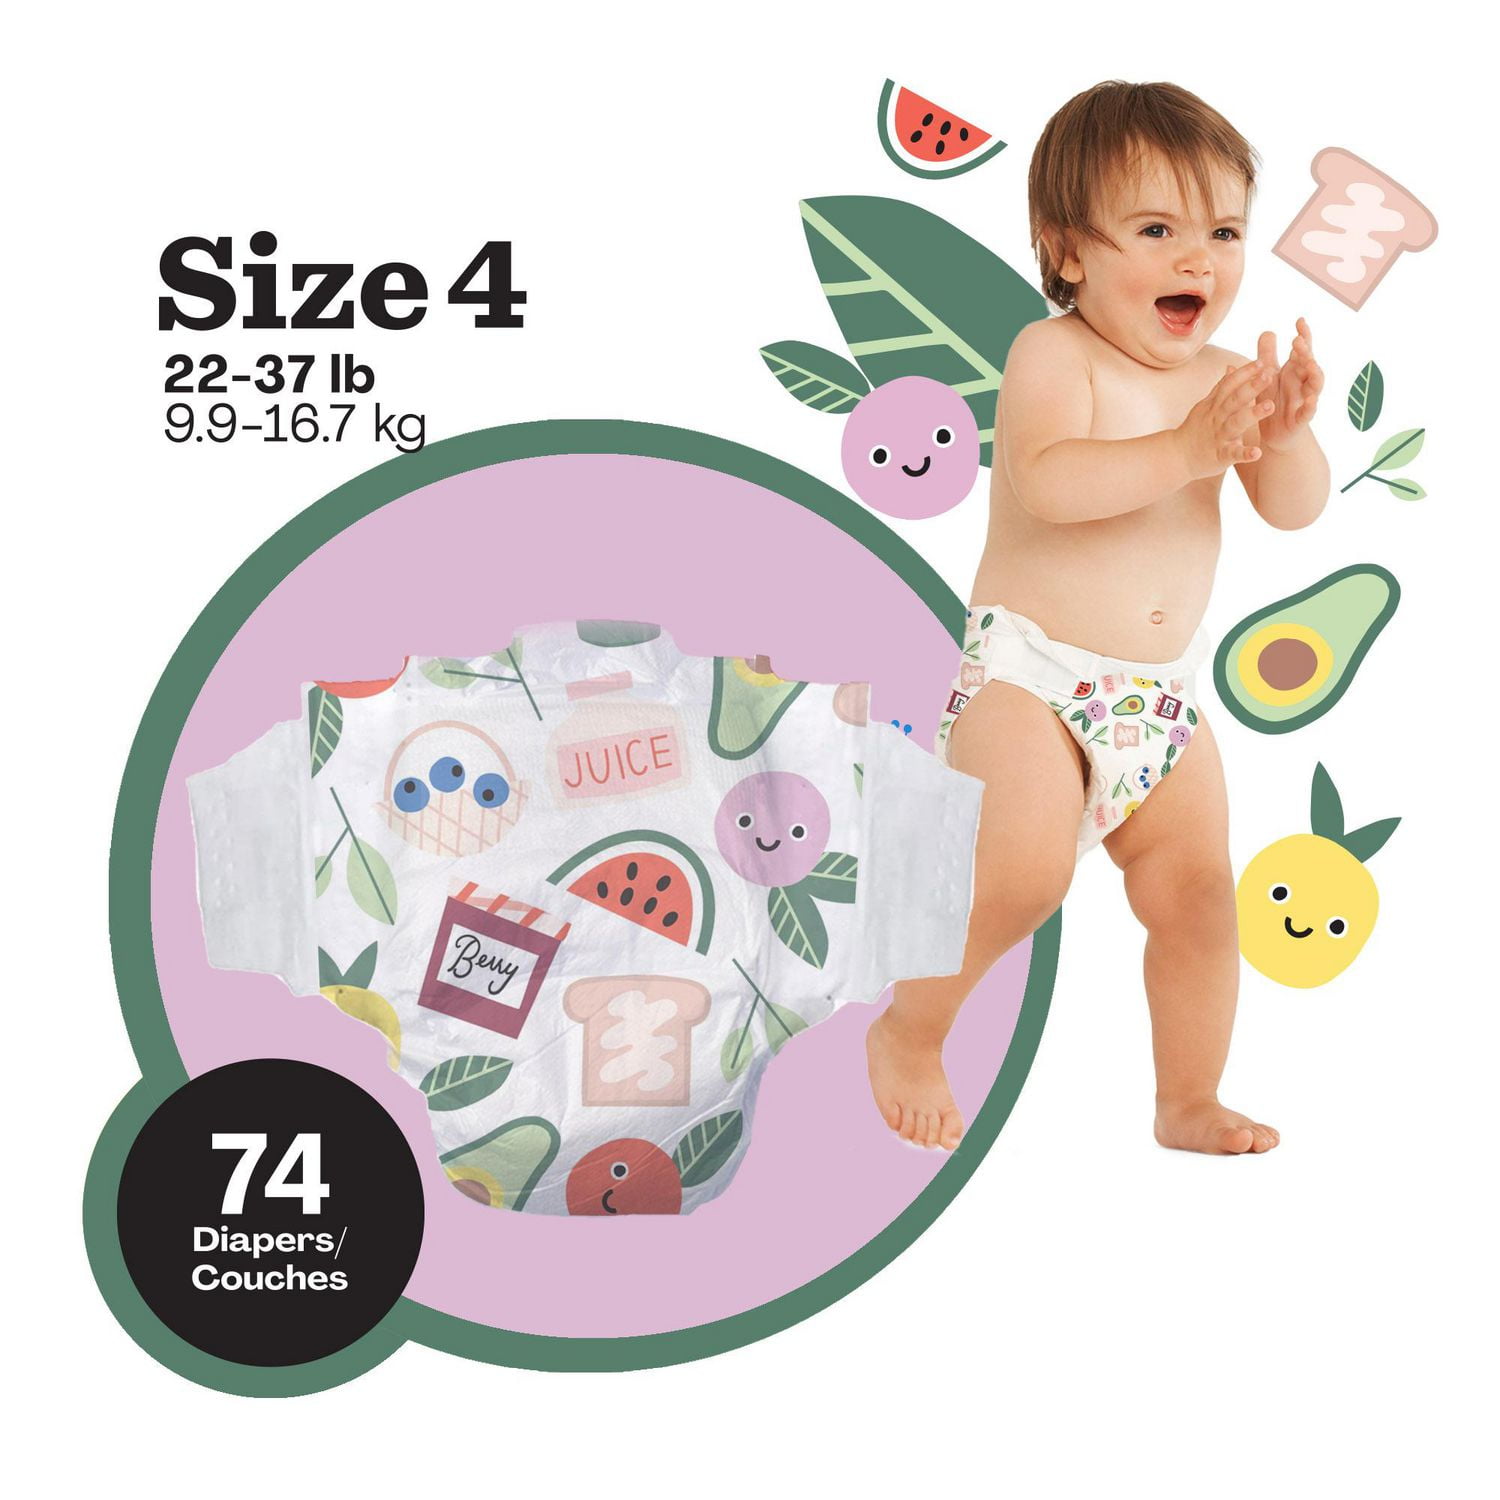 Hello Bello Disposable Diapers Size 2 (10-16 lbs), Extra-Absorbent,  Hypoallergenic, and Eco-Friendly Baby Diapers with Snug and Comfort Fit,  100 Count